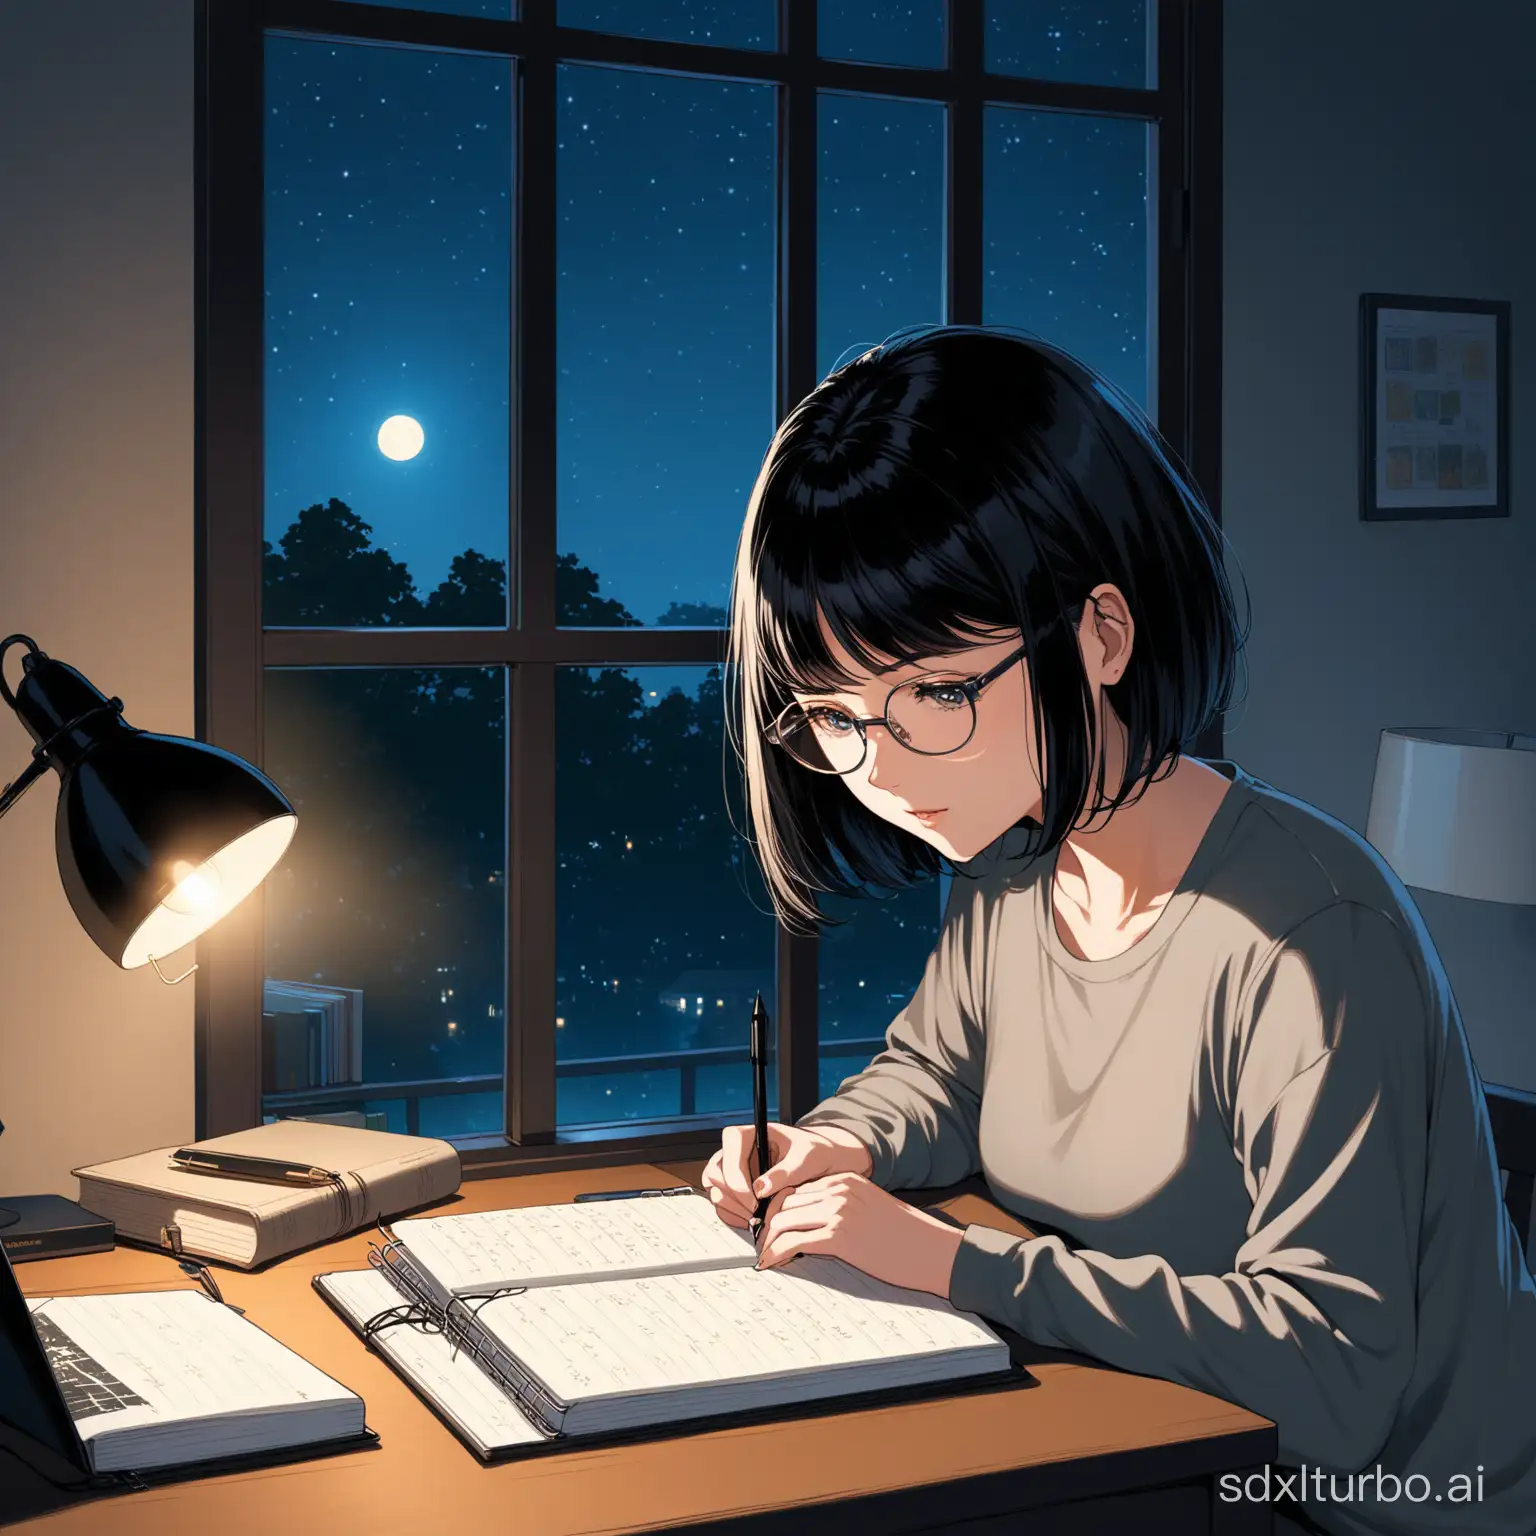 the woman who with black bob hair and wear glasses and grey long-sleevet-shirt is writing something beside the window in the night，her eyes is looking at the notebook.there are a lamp on desk，and some books on corner of desk，and a computer is in front of the desk